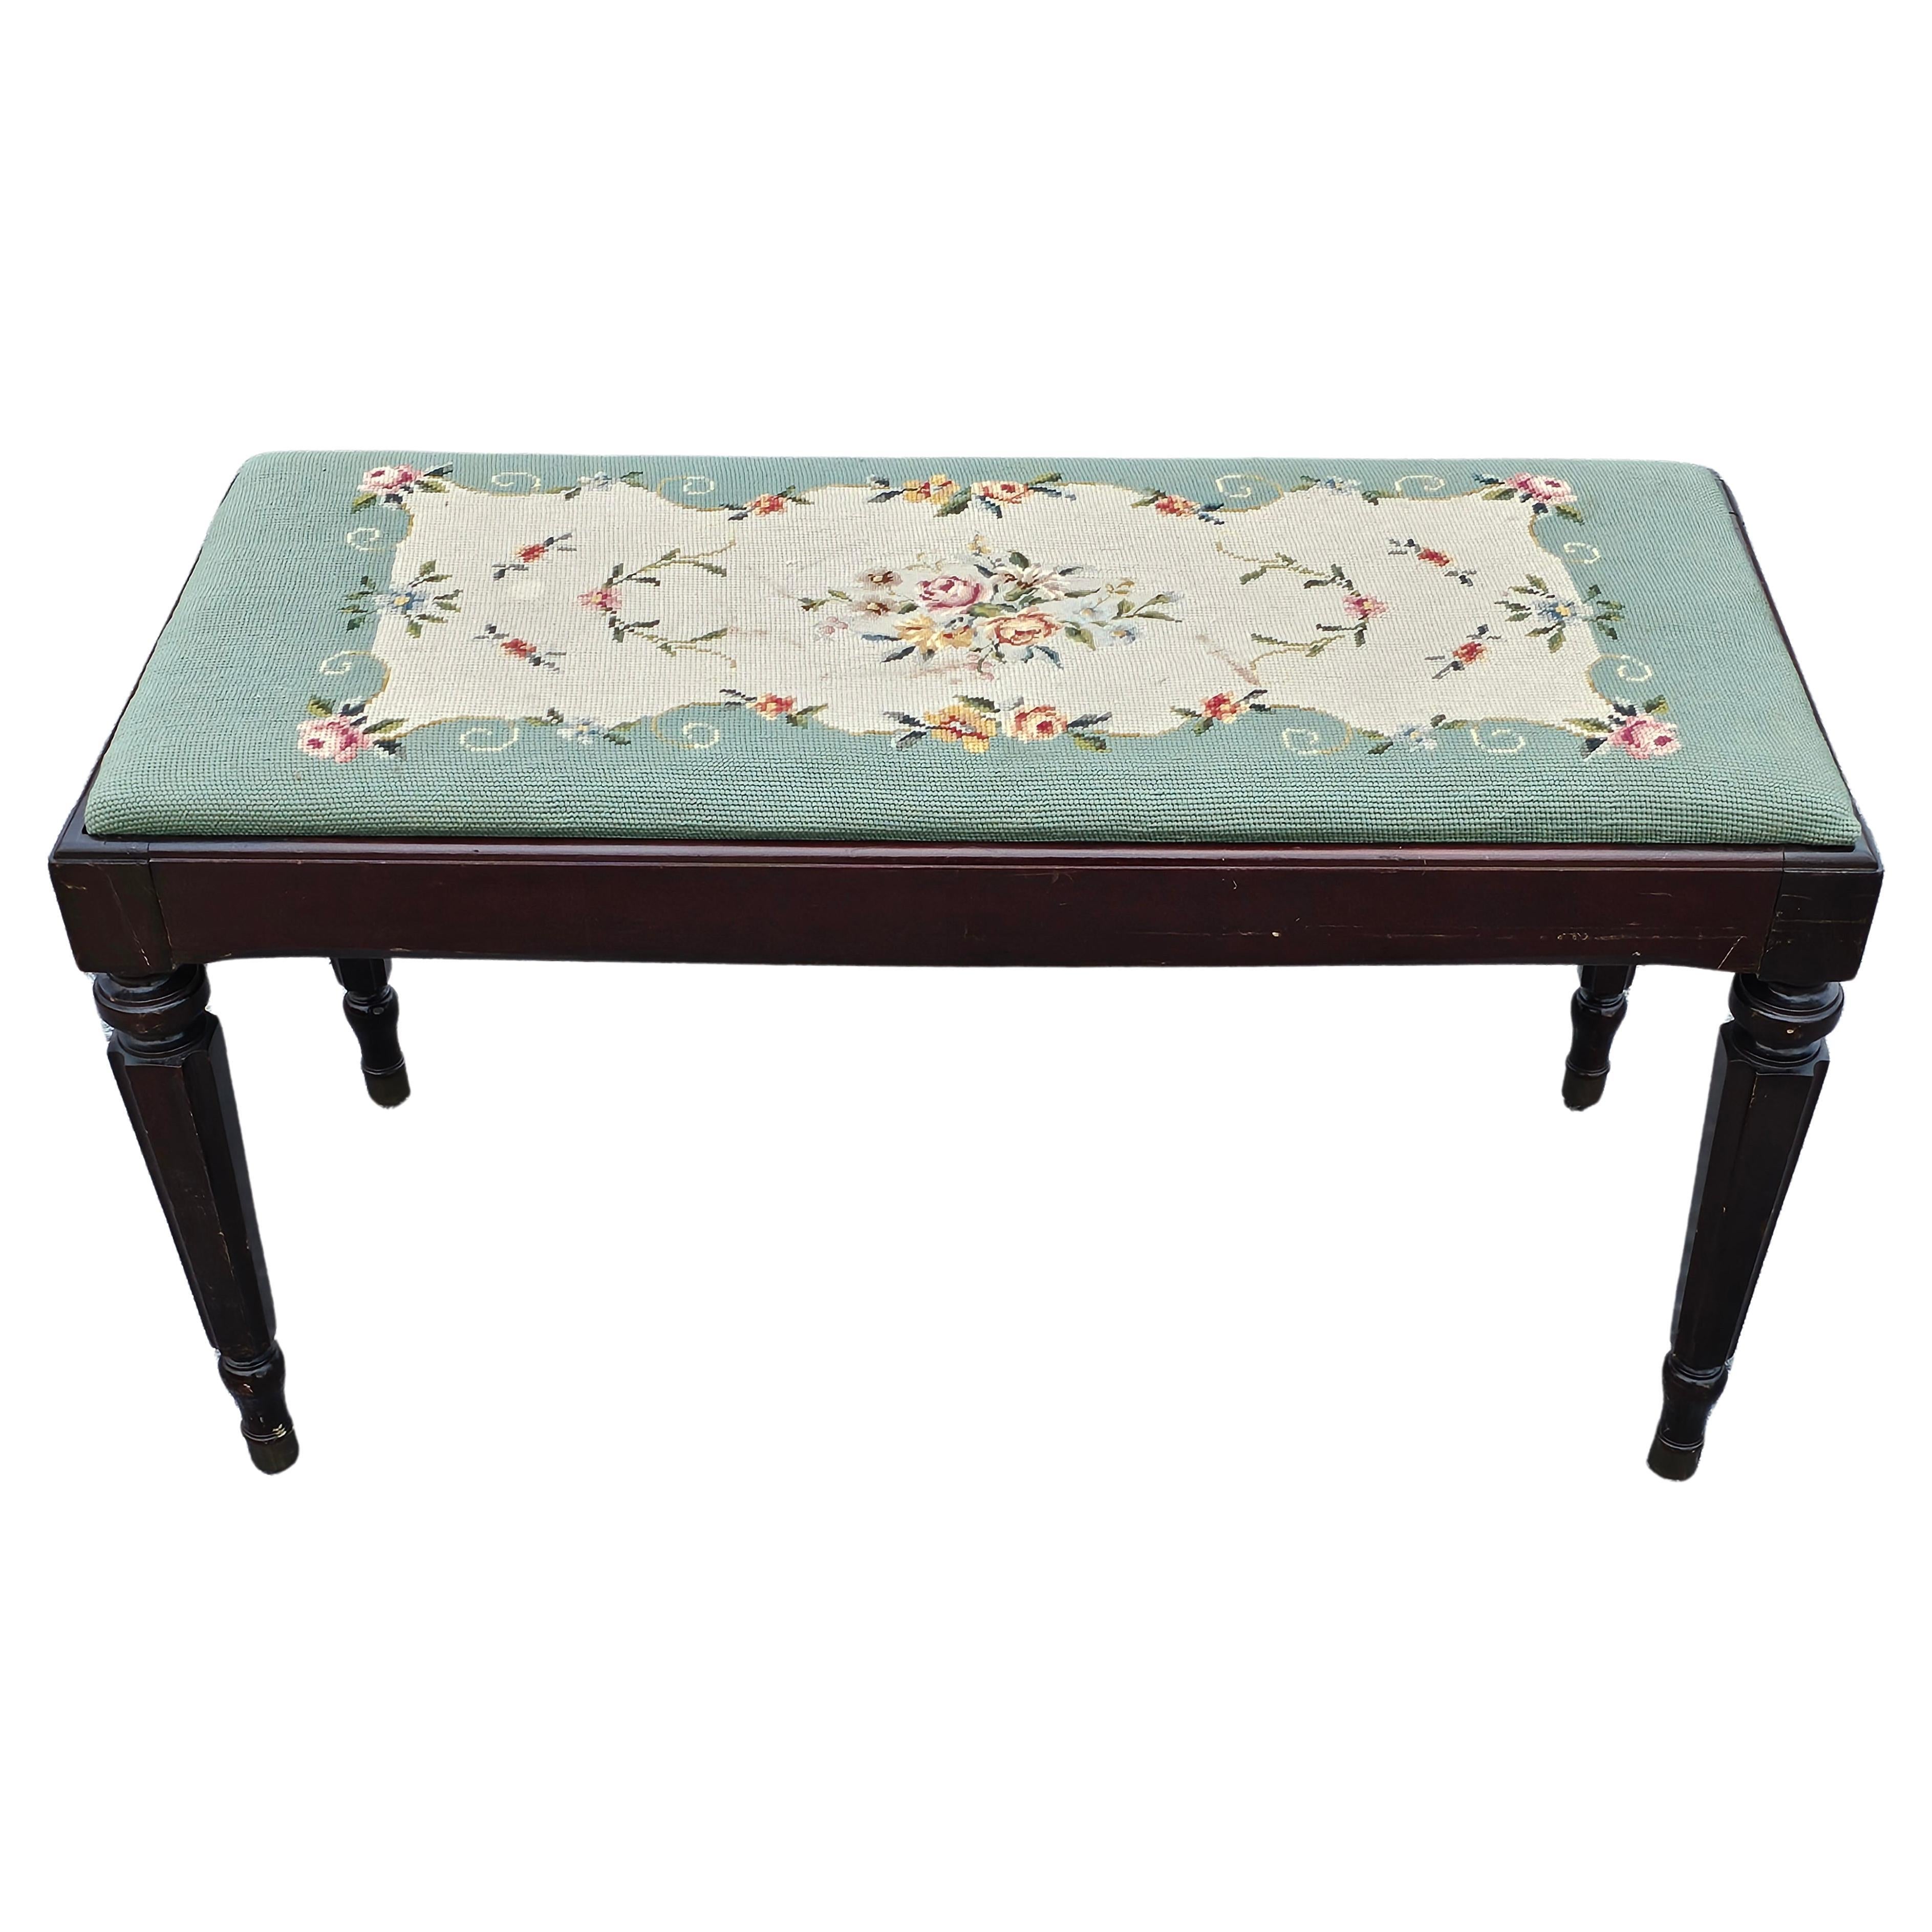 Needlework Mid 20th Century Mahogany and Needlepoint Upholstered Storage Bench For Sale